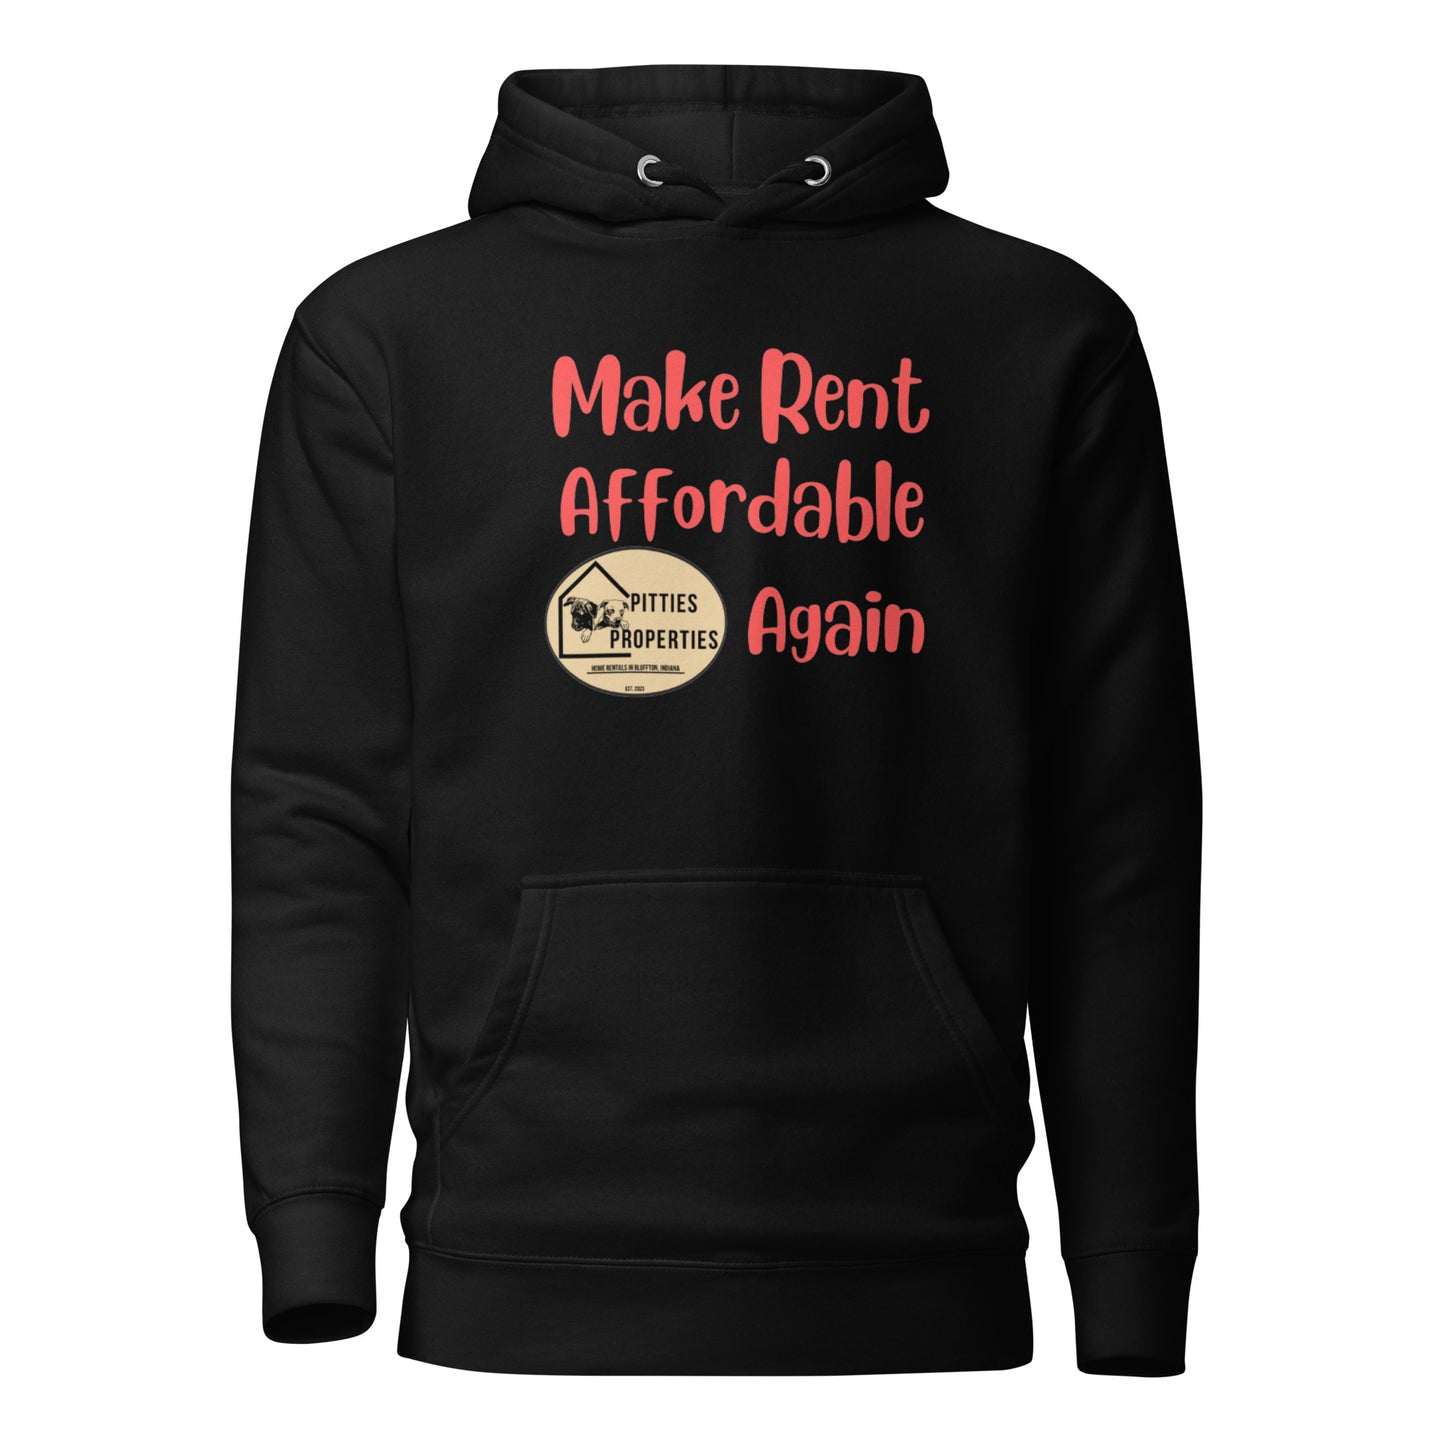 Pitties Properties focuses on affordability with our rentals. Wear this hoodie proudly and stay warm around town to let everyone know to Make Rent Affordable Again.